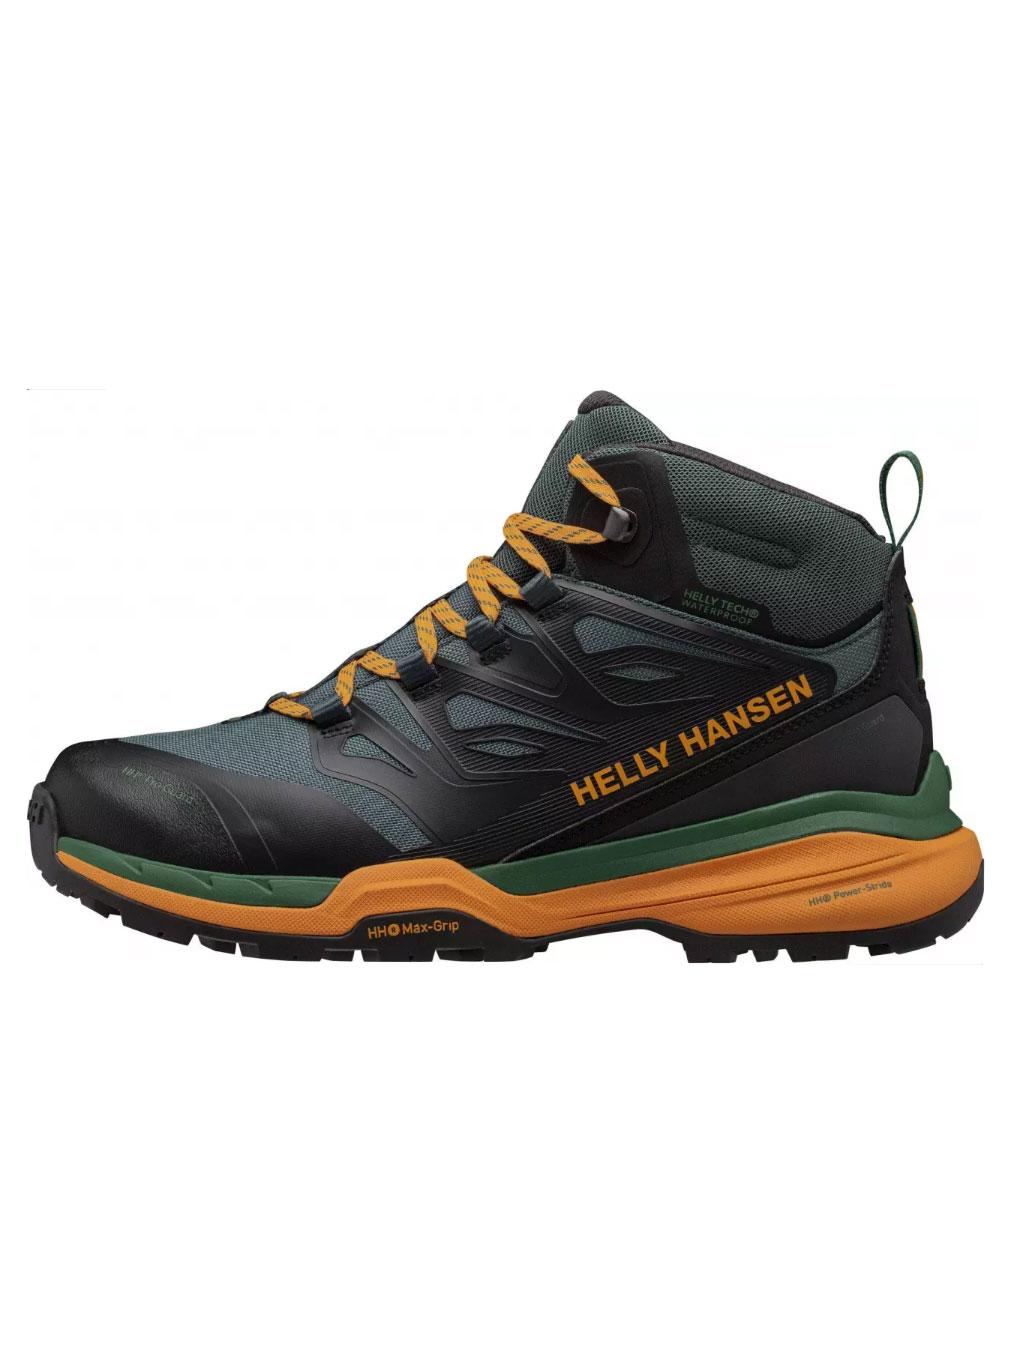 Selected image for HELLY HANSEN Muške cipele TRAVERSE HT Boots crne